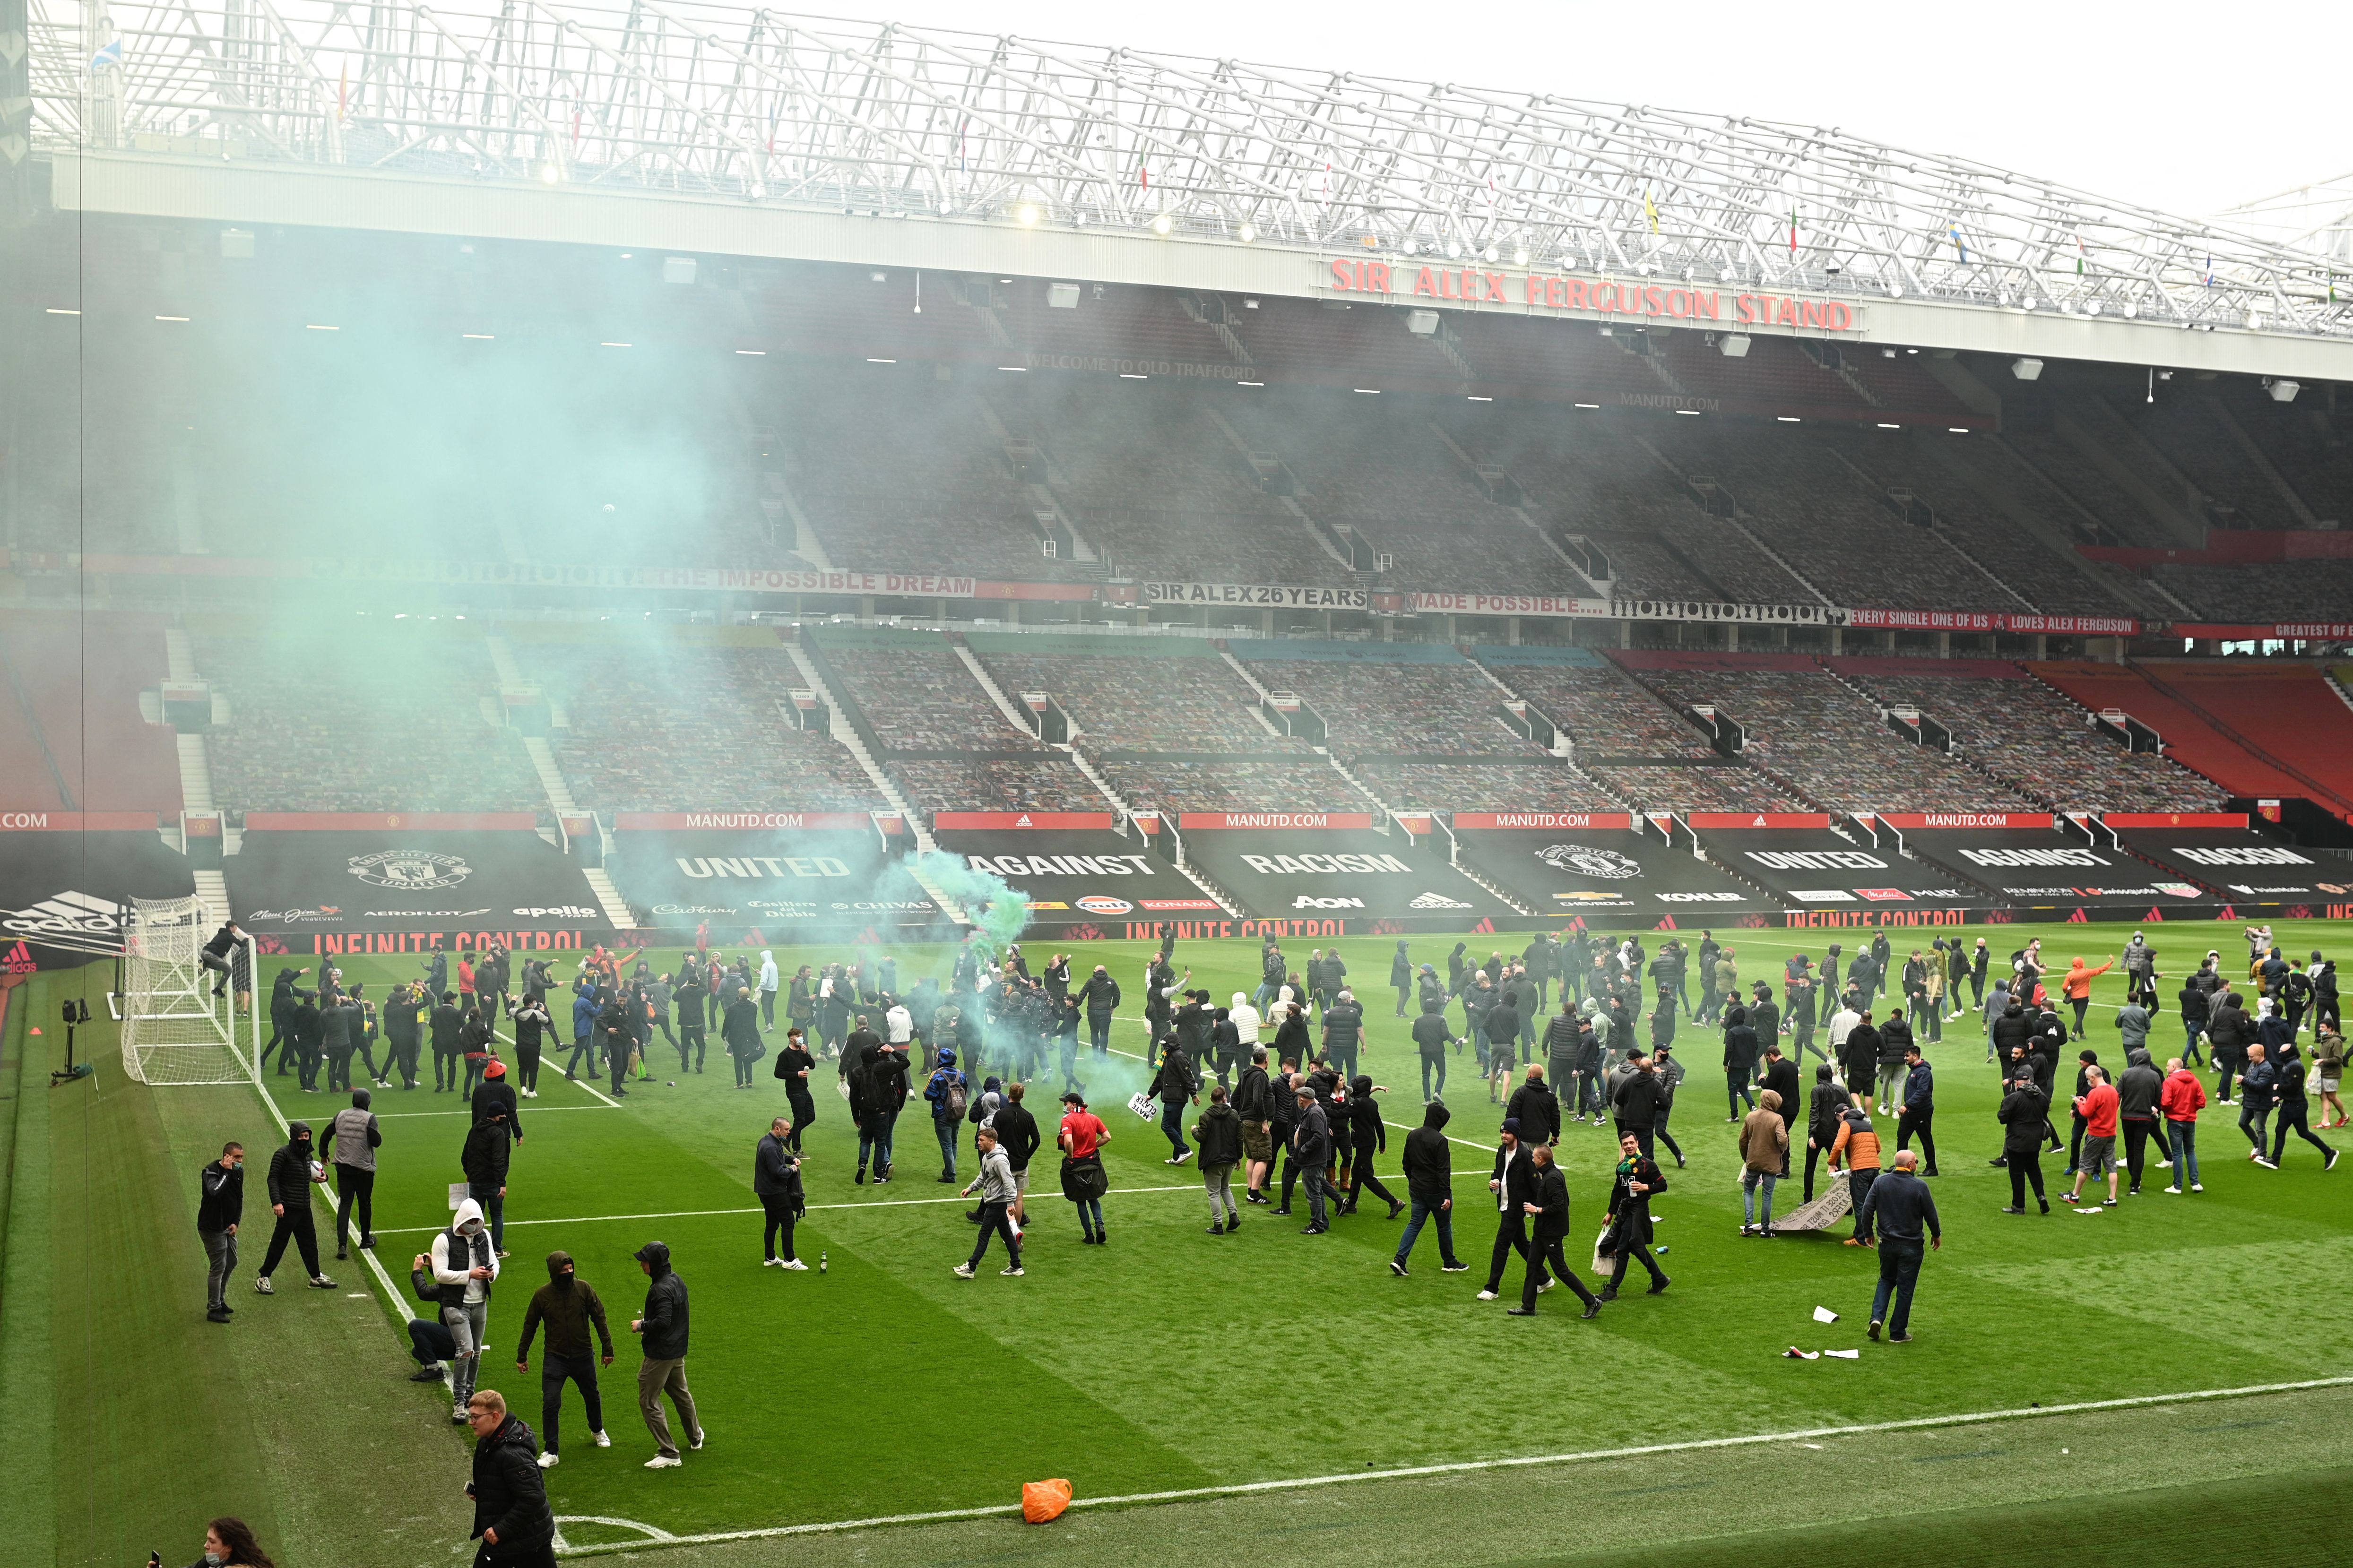 Manchester United fans storm the pitch at Old Trafford